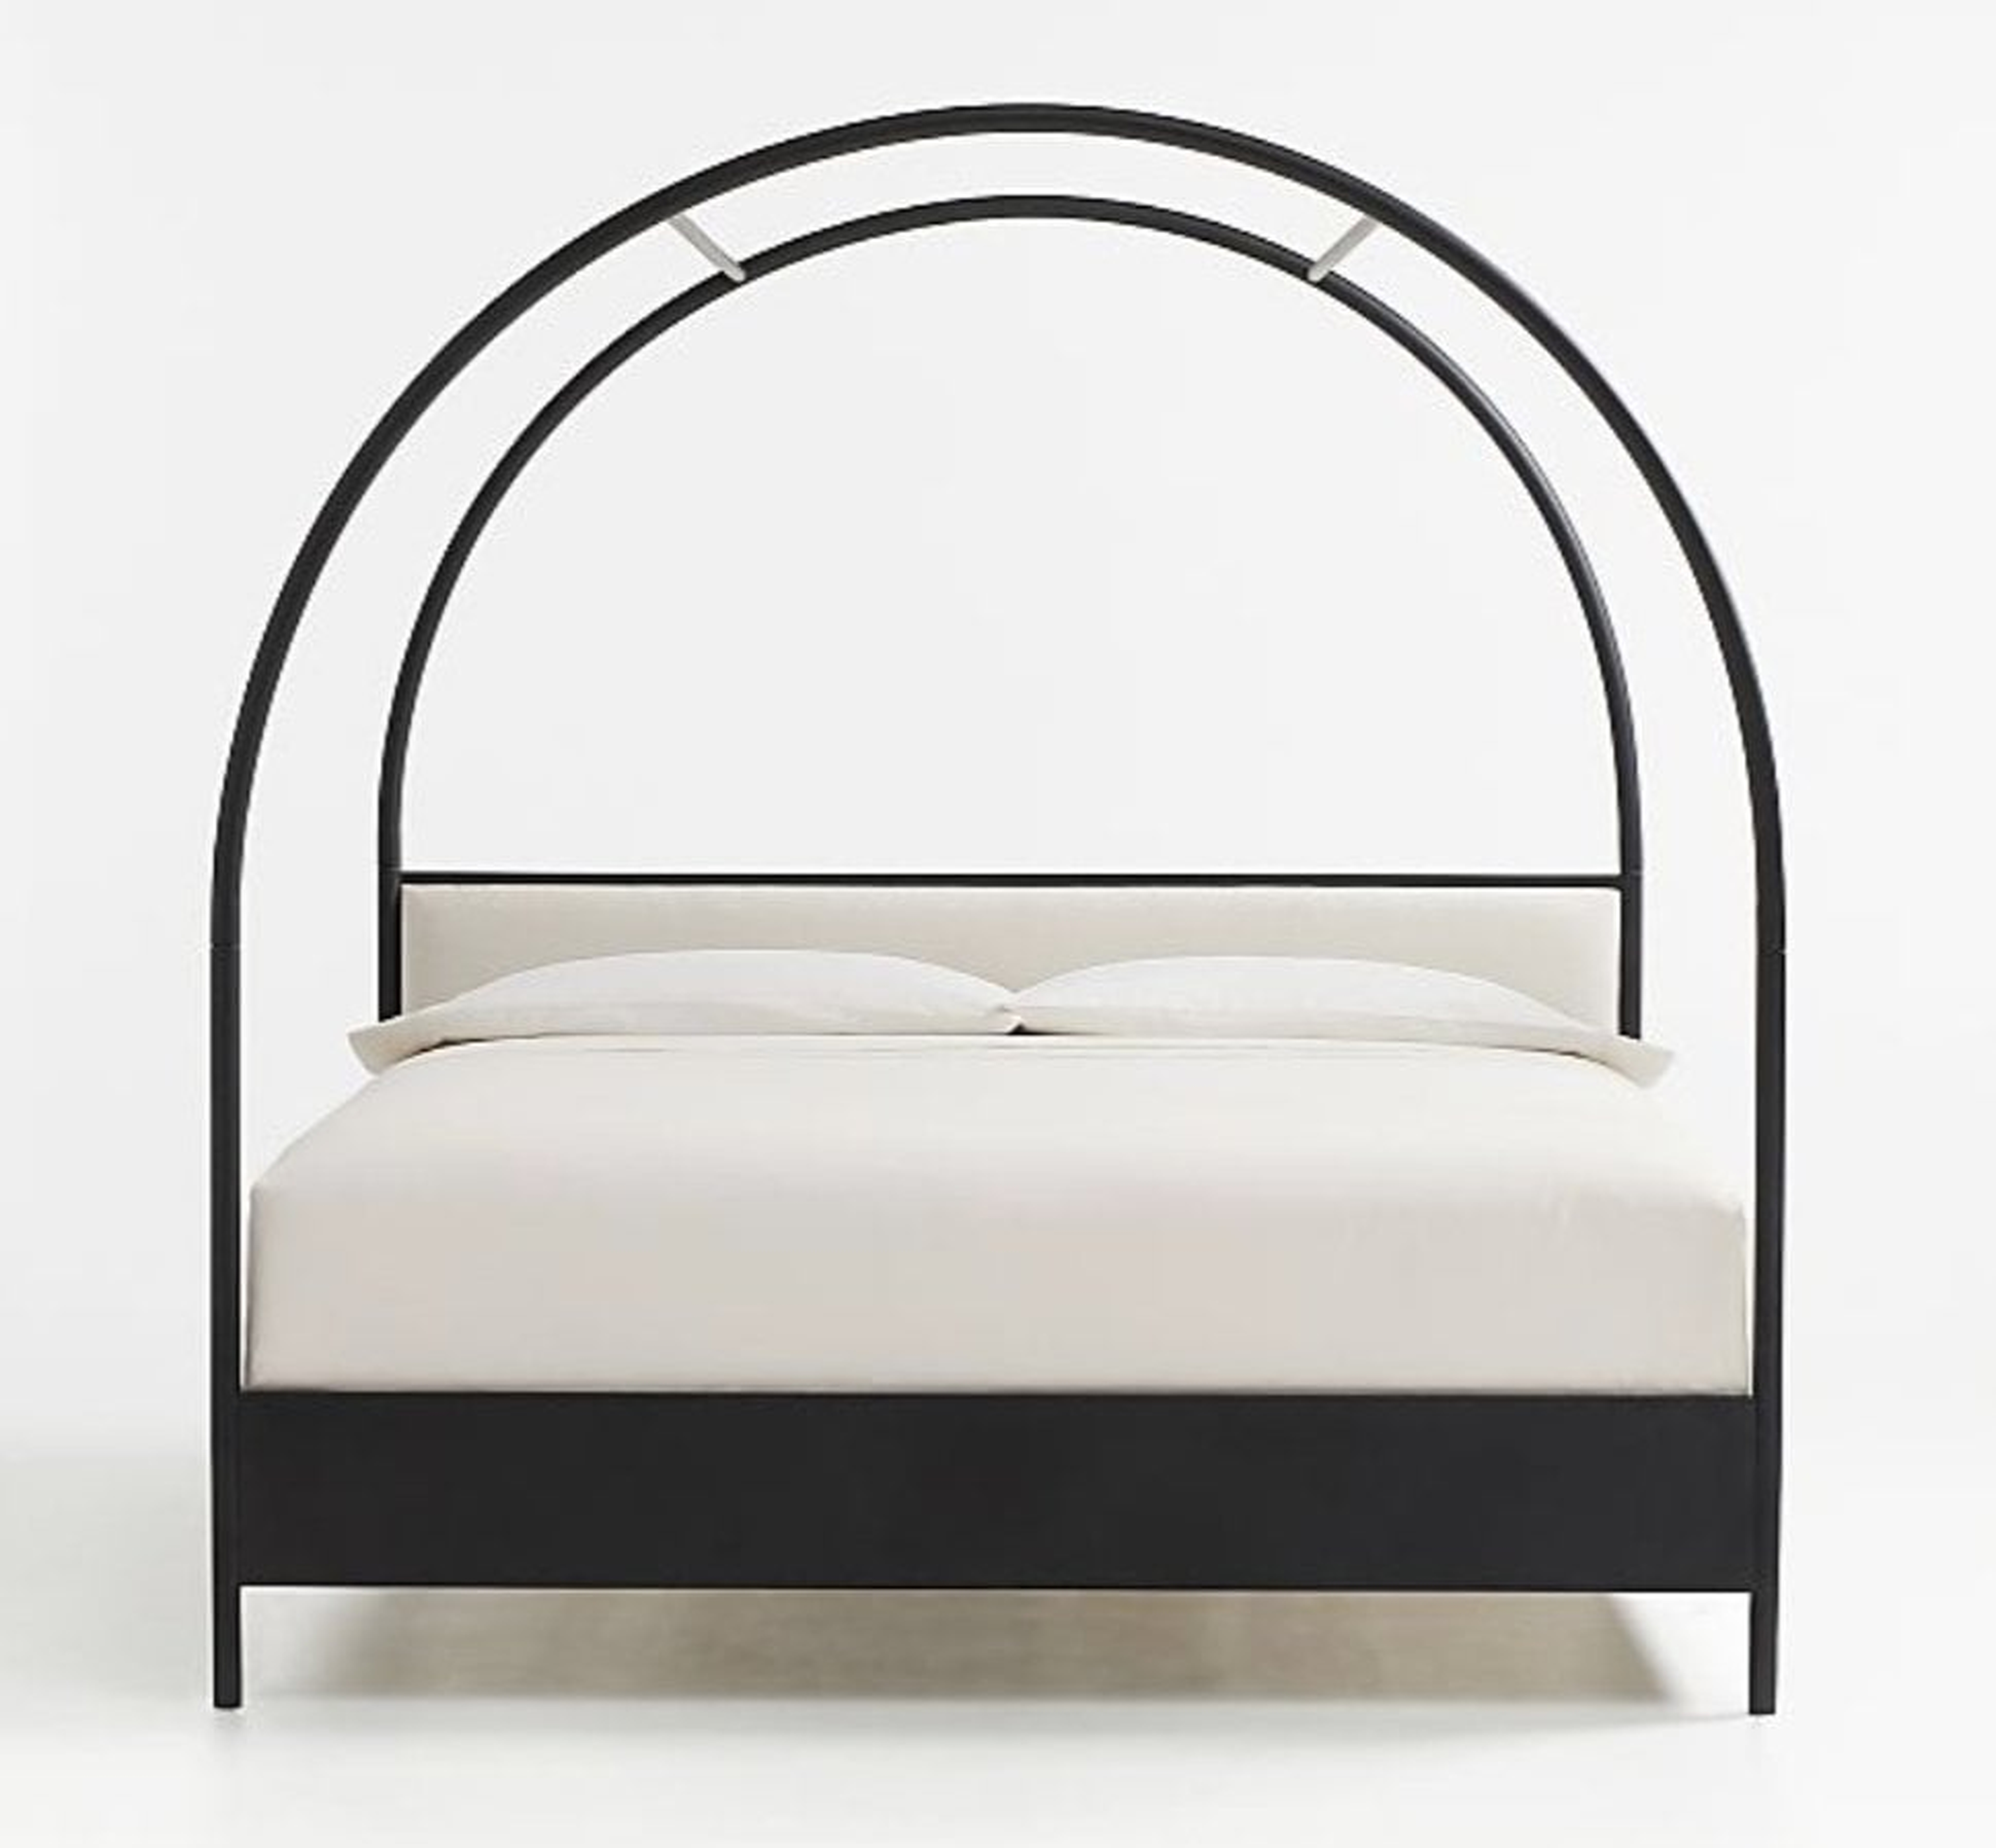 Canyon King Arched Canopy Bed with Upholstered Headboard - Crate and Barrel